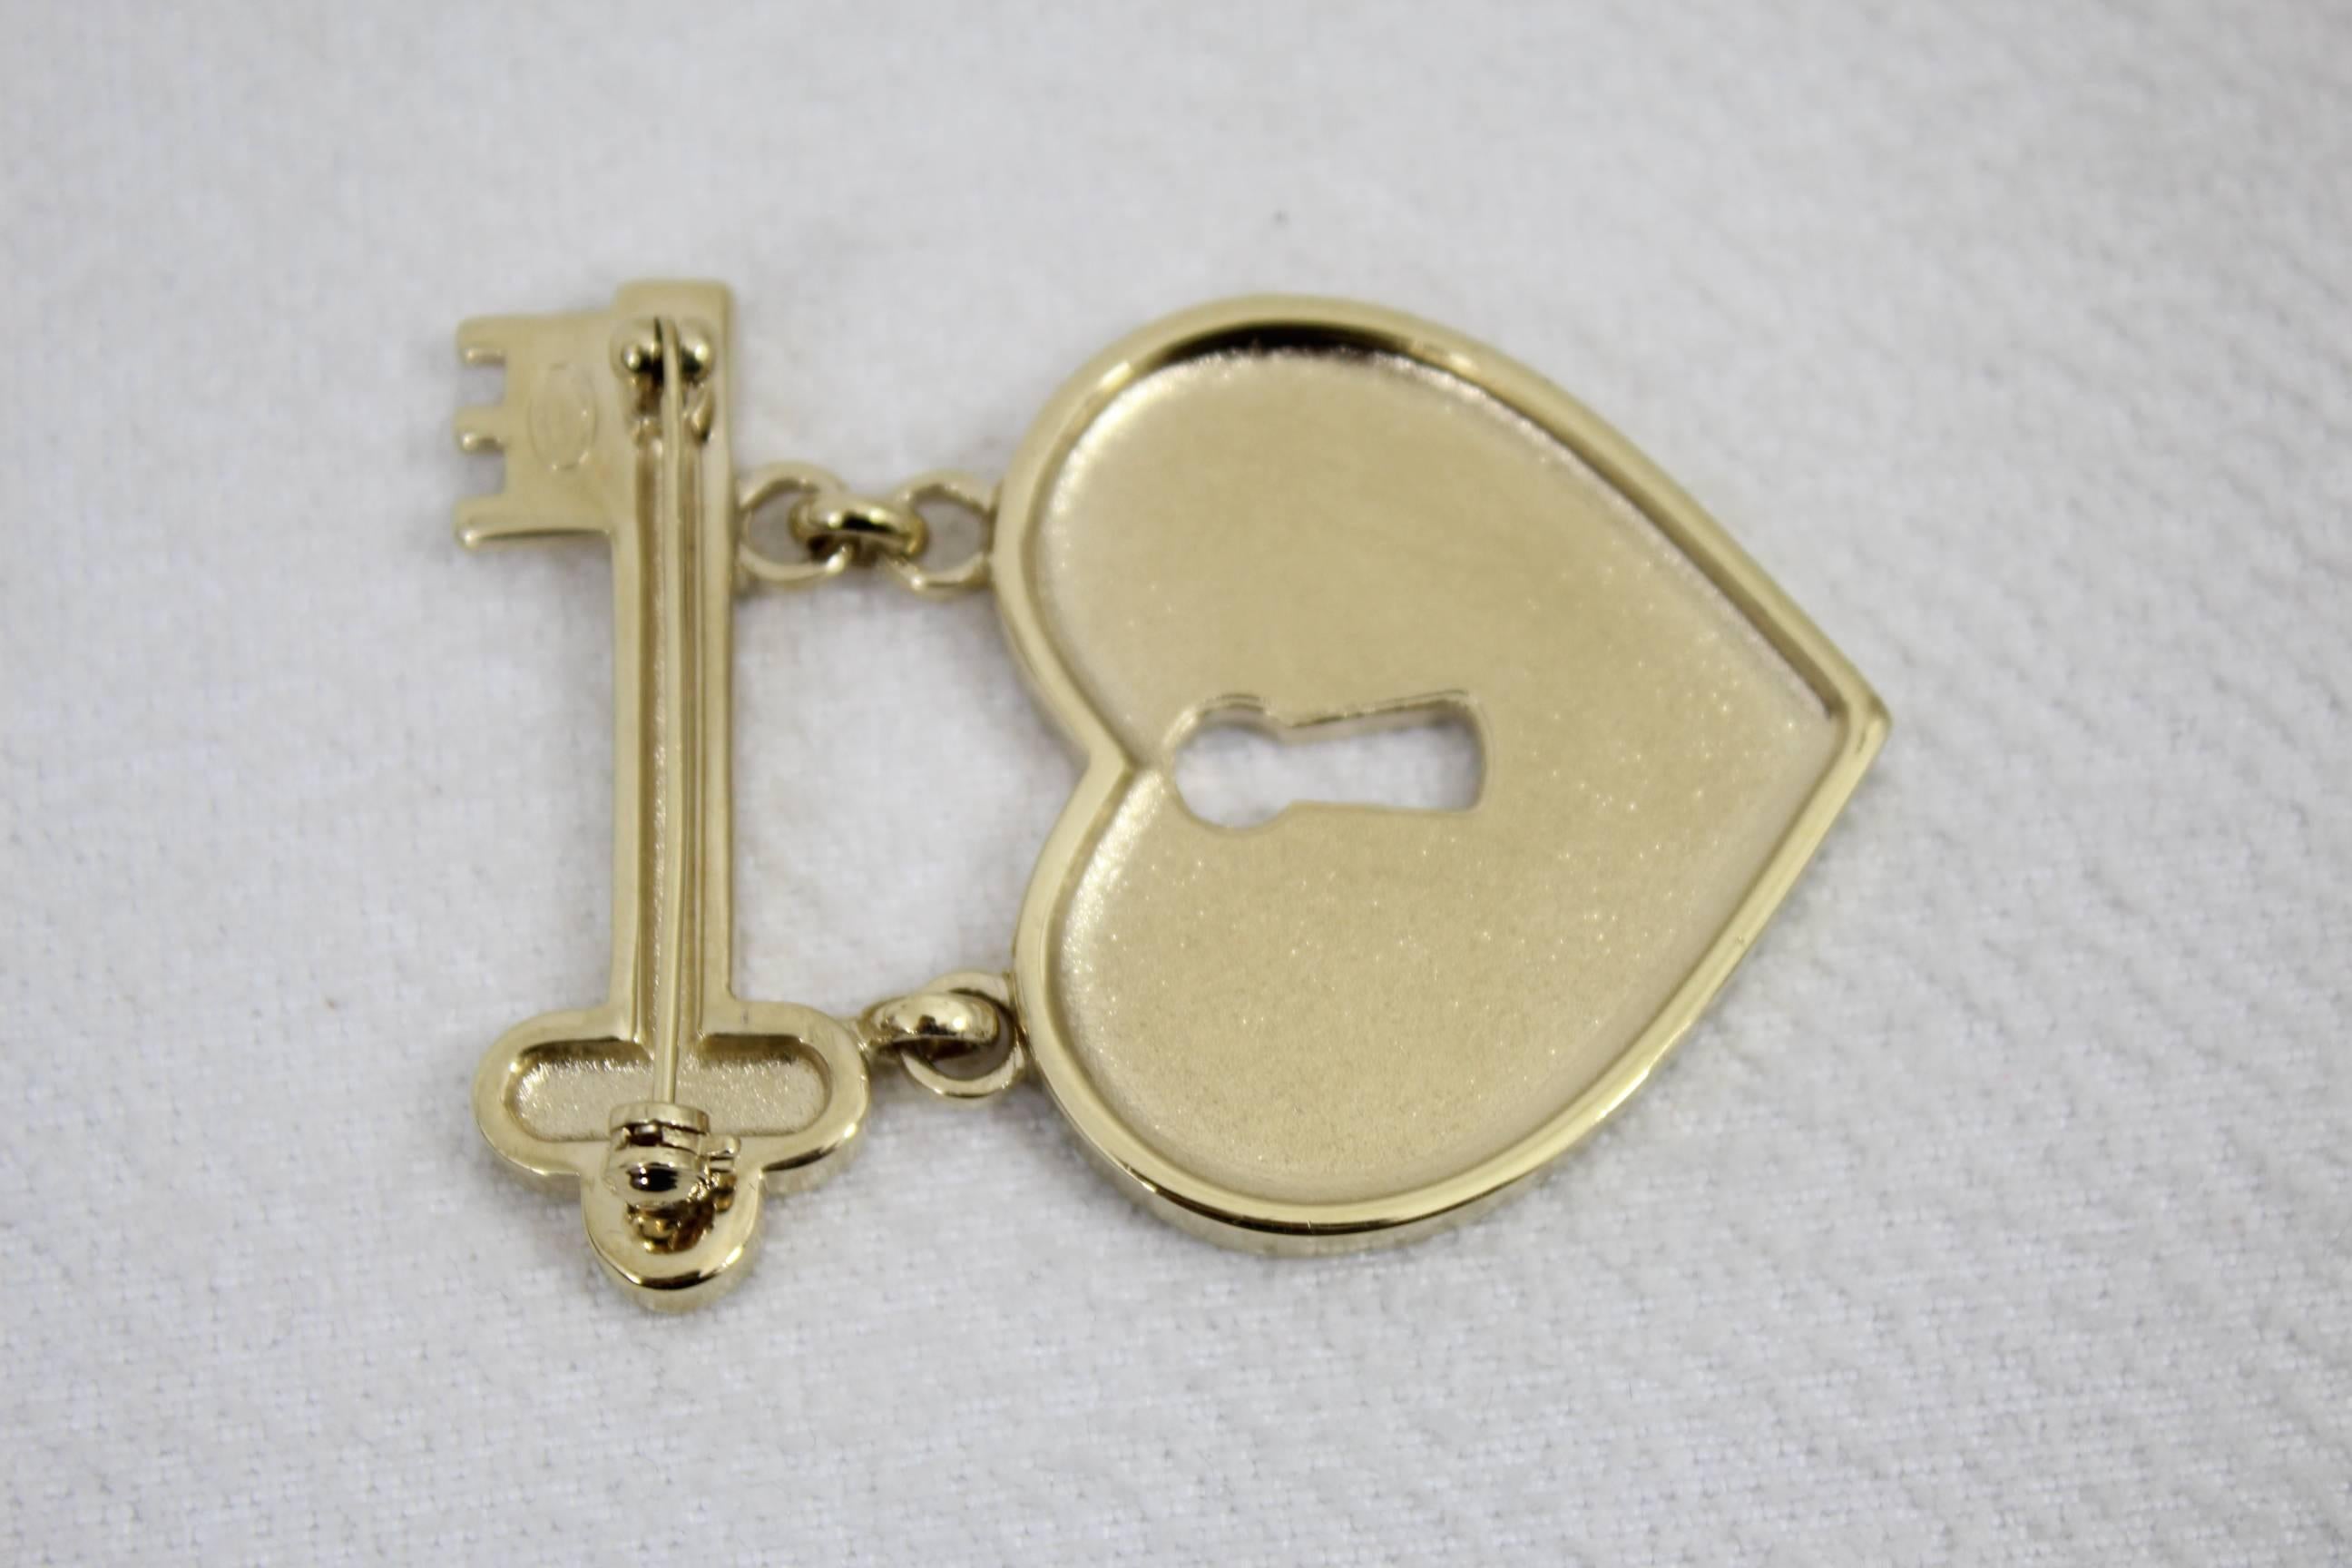 Really ncie and in excellent condition a Chanel brooche heart shaped with a key and a heart.

Size 2x1.5 inches